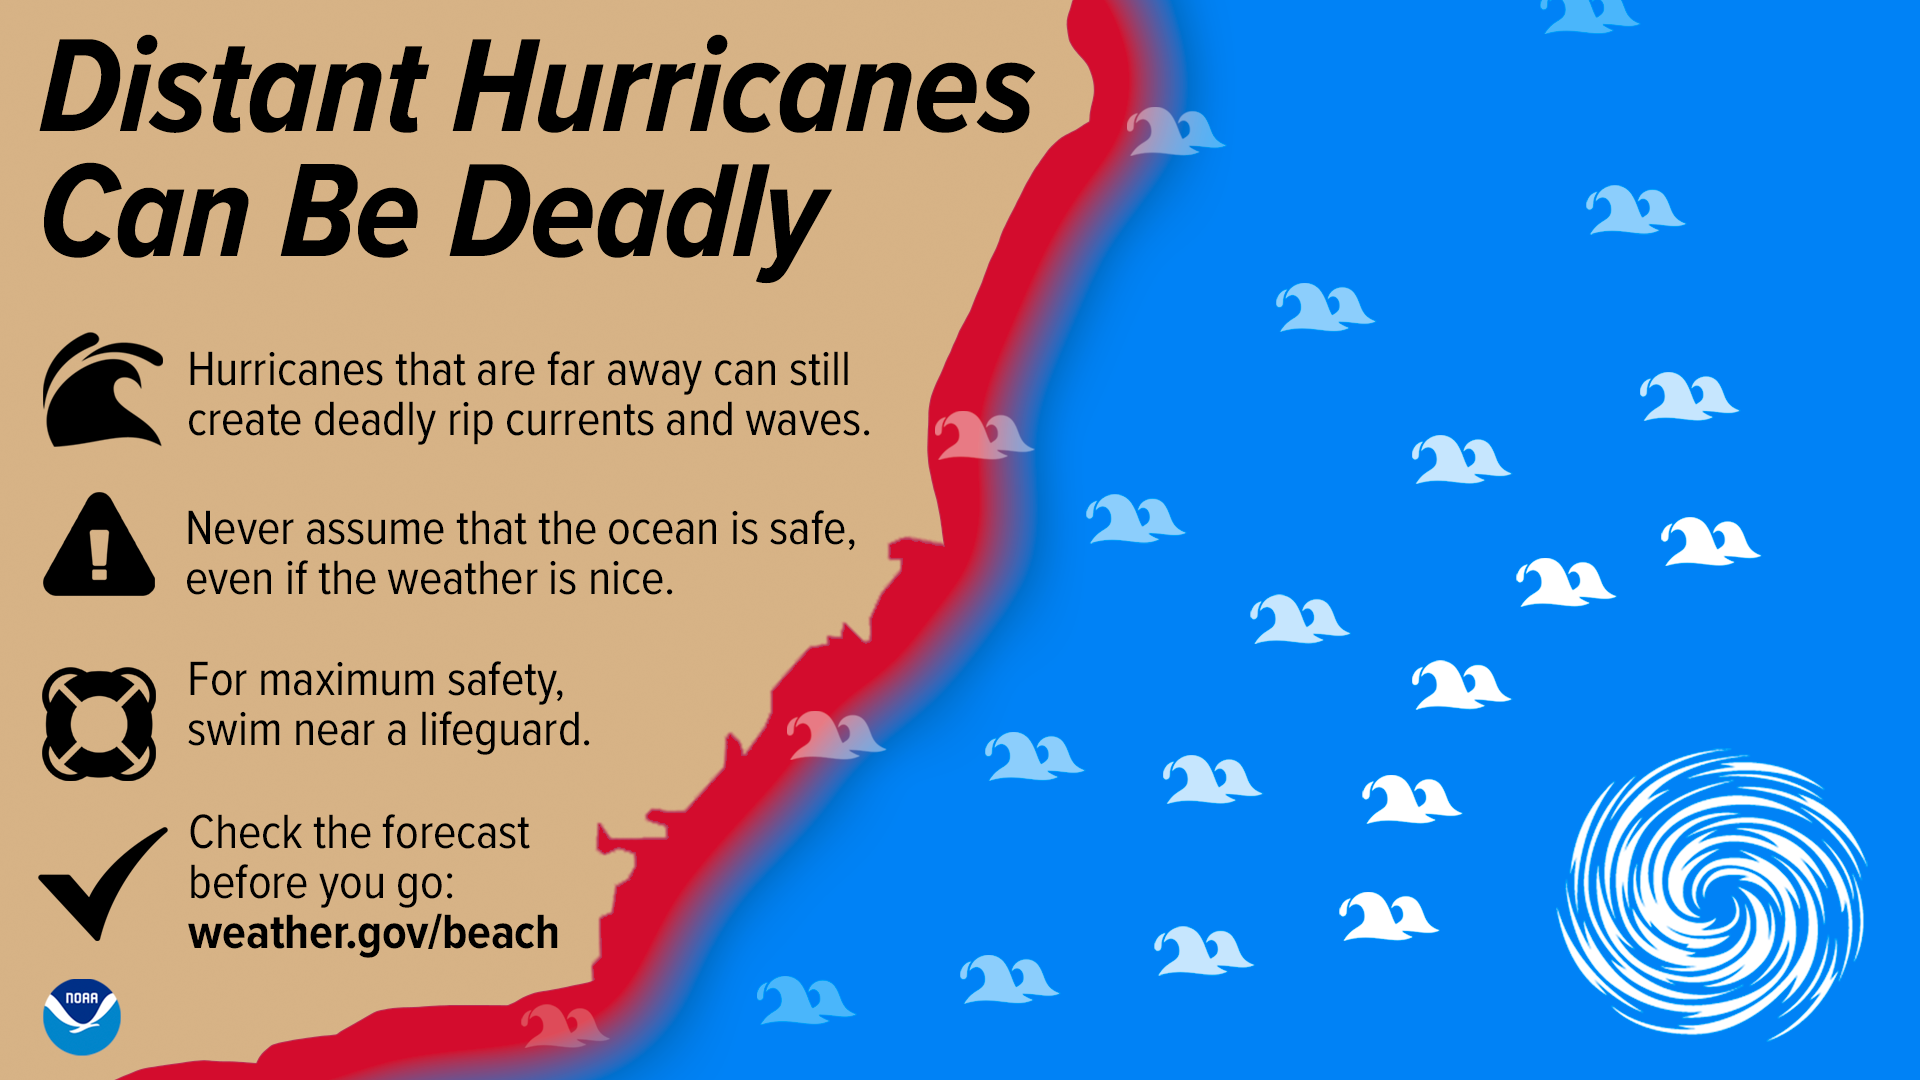 Infographic on dangers of rip currents from tropical cyclones